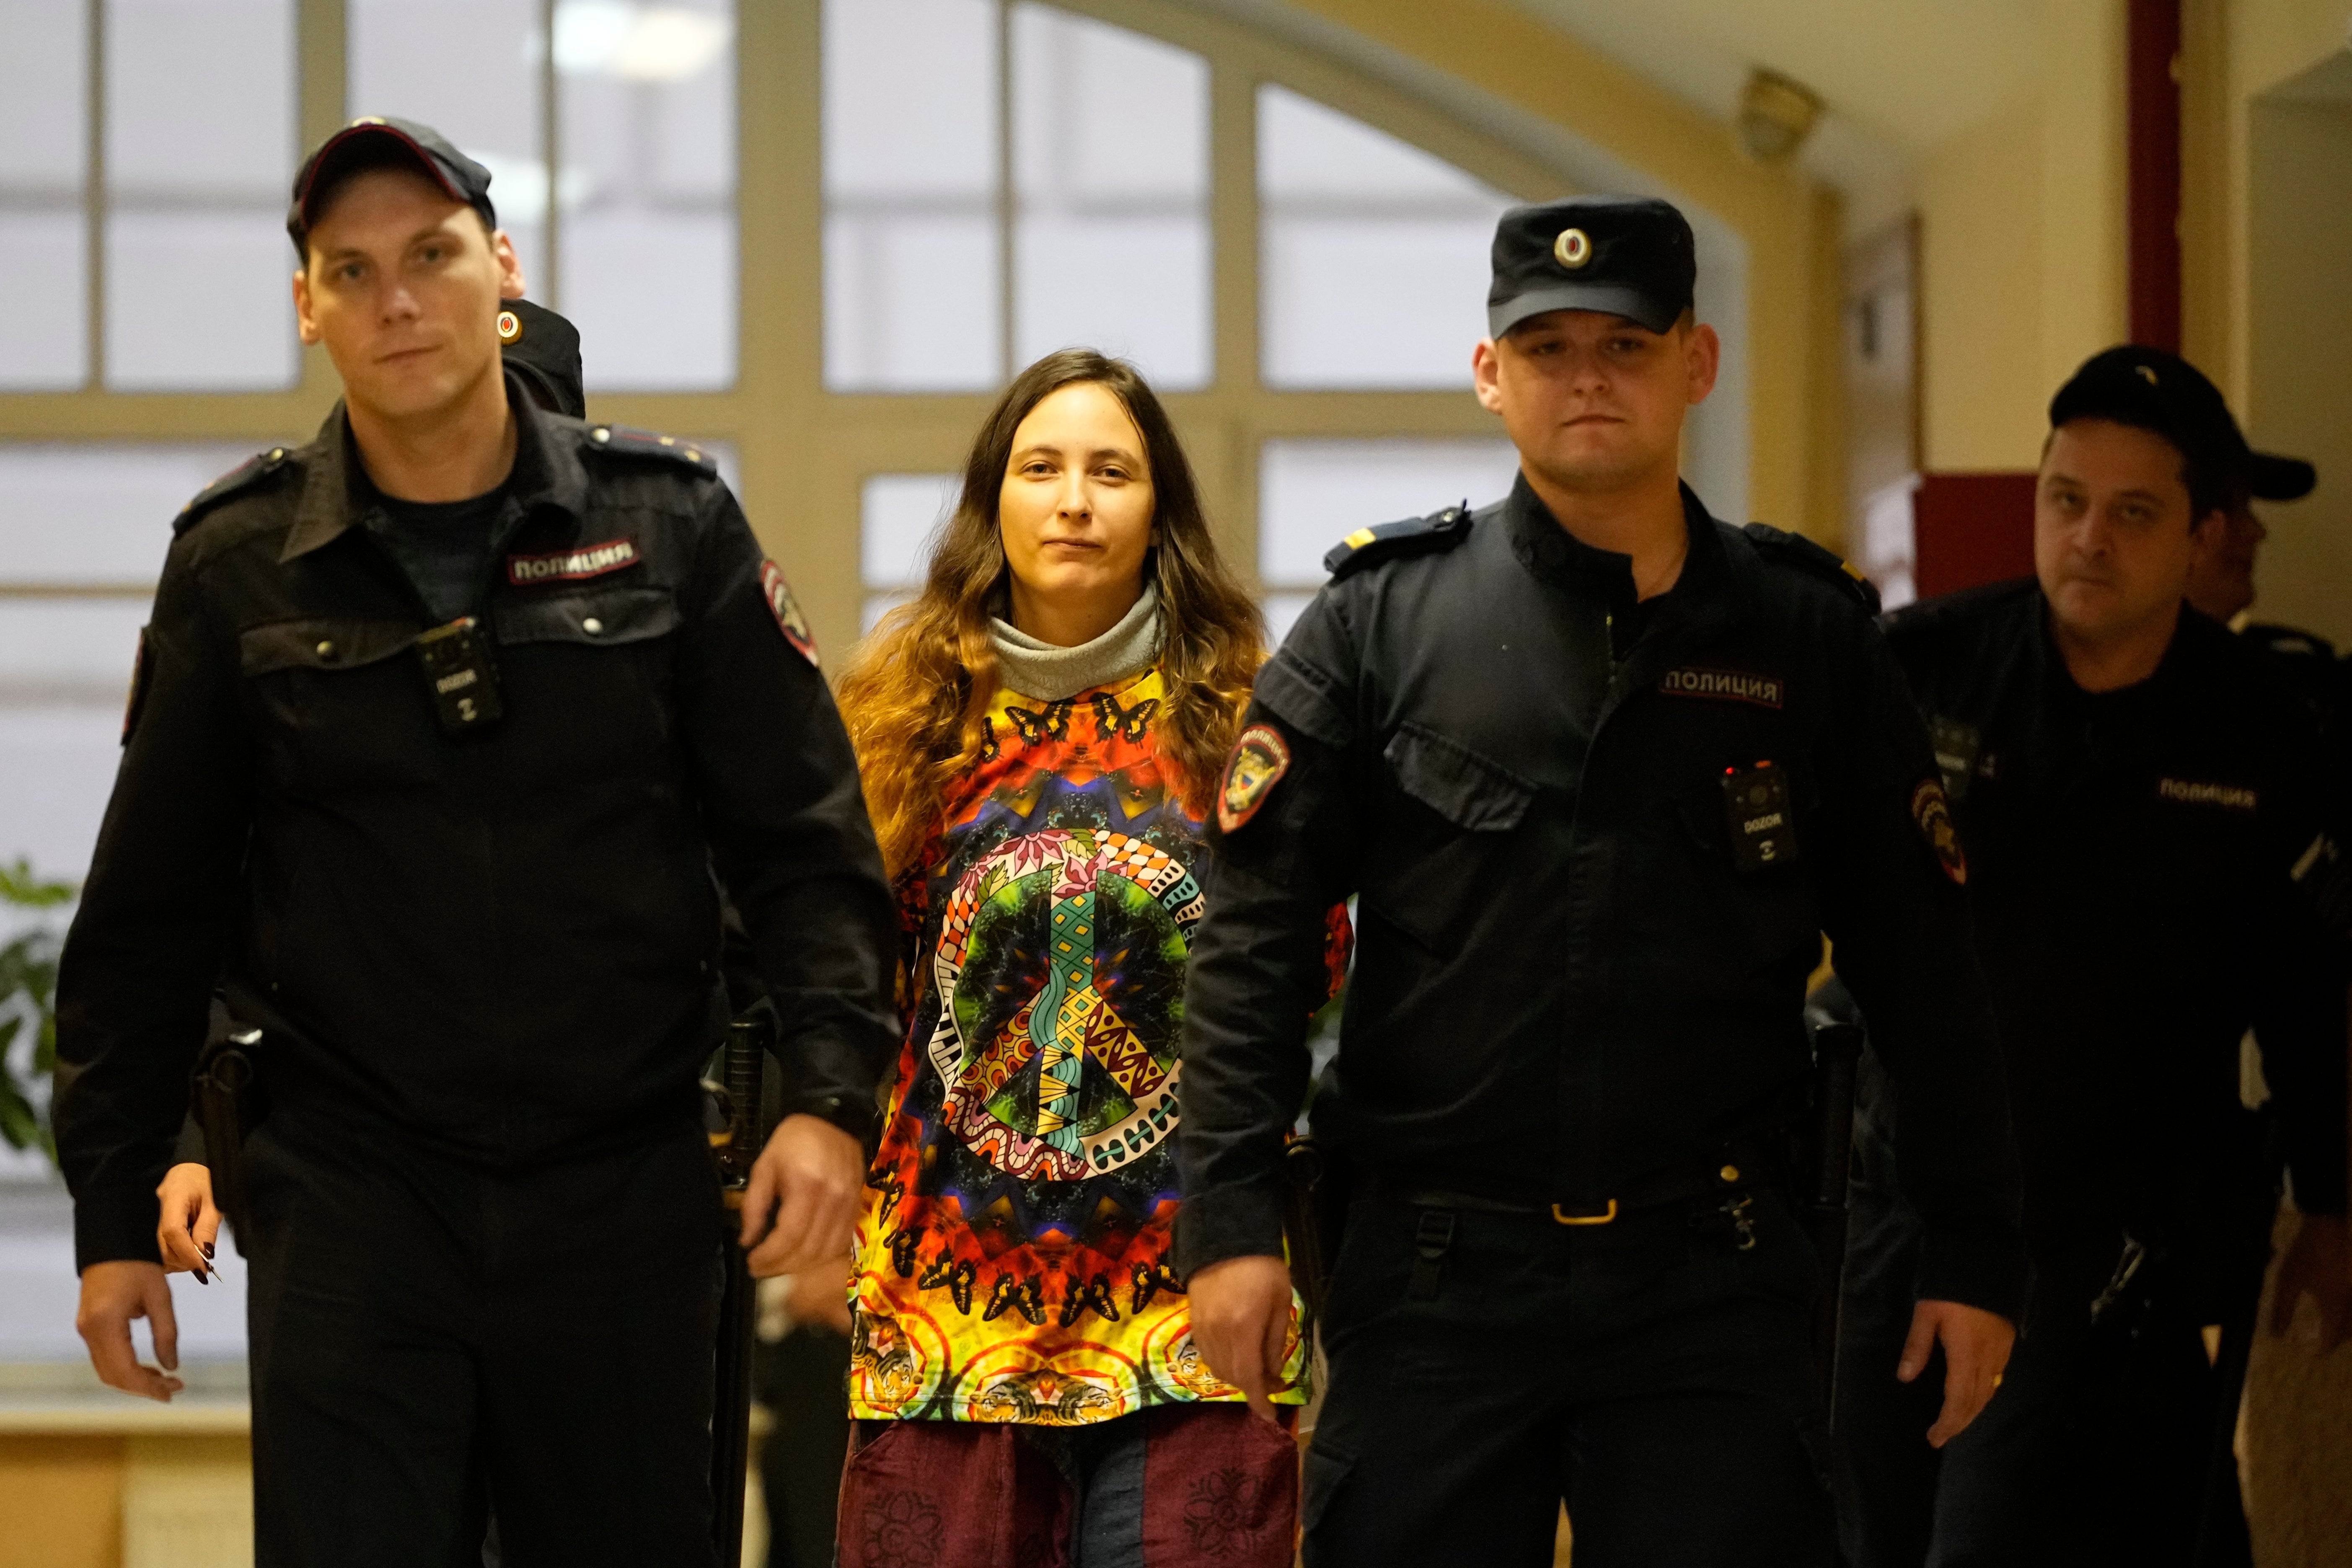 Sasha Skochilenko, a 33 year-old artist and musician, second left, is escorted by officers to the court room for a hearing in the Vasileostrovsky district court in St. Petersburg